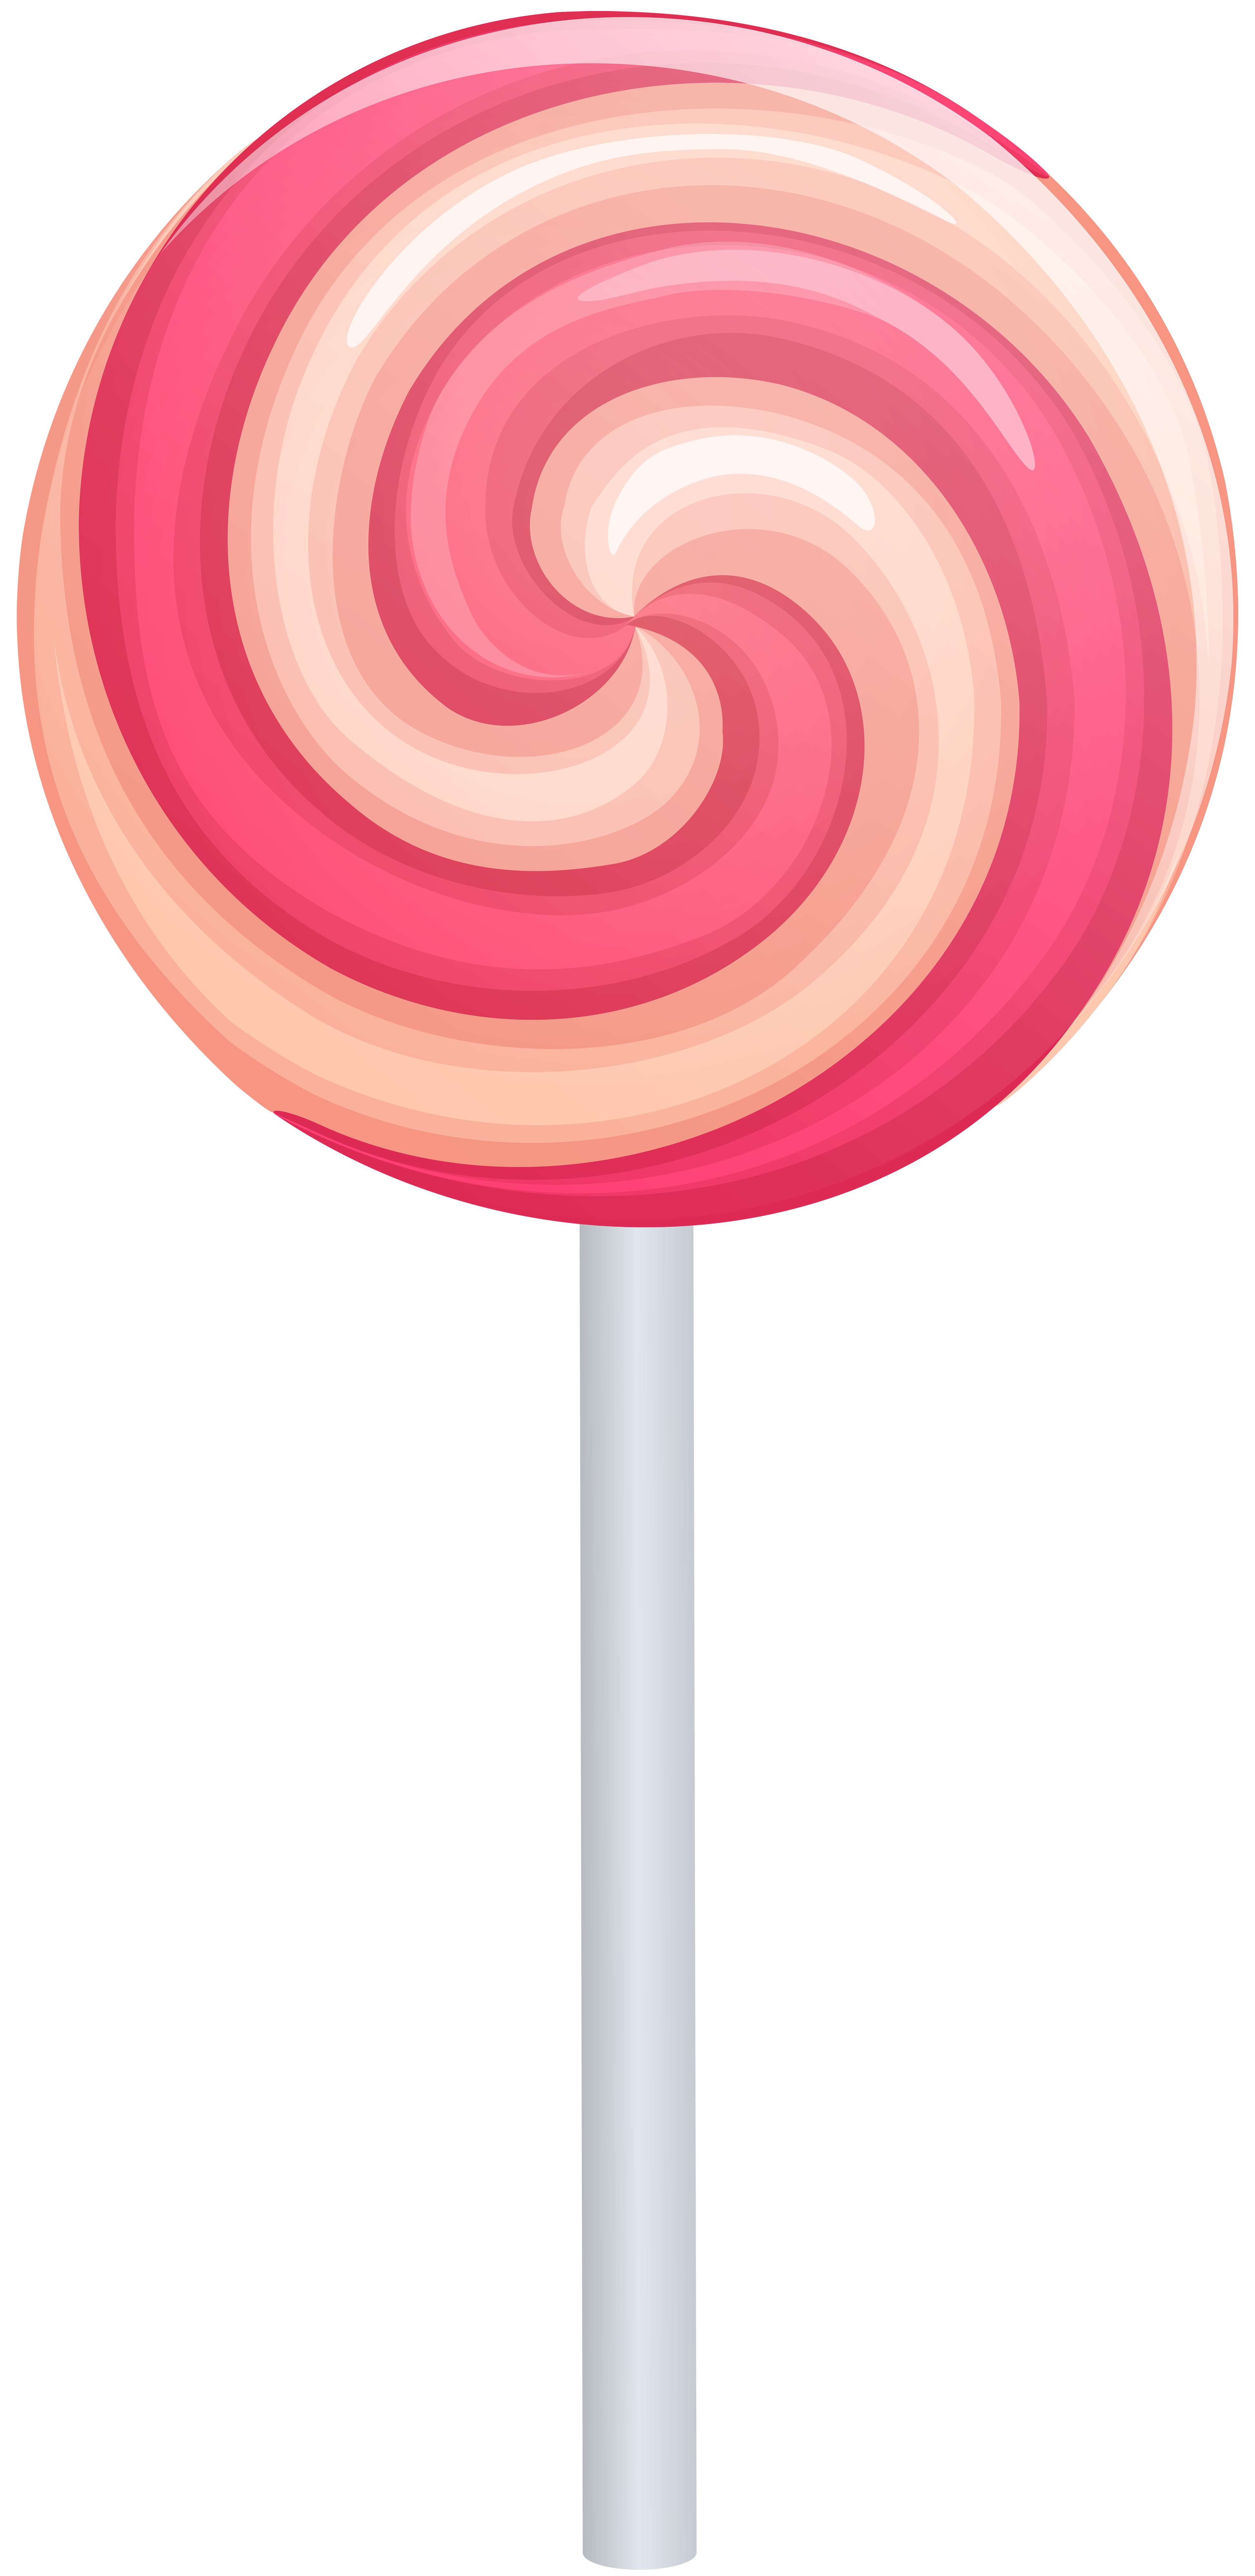 pink and white swirl lollipops